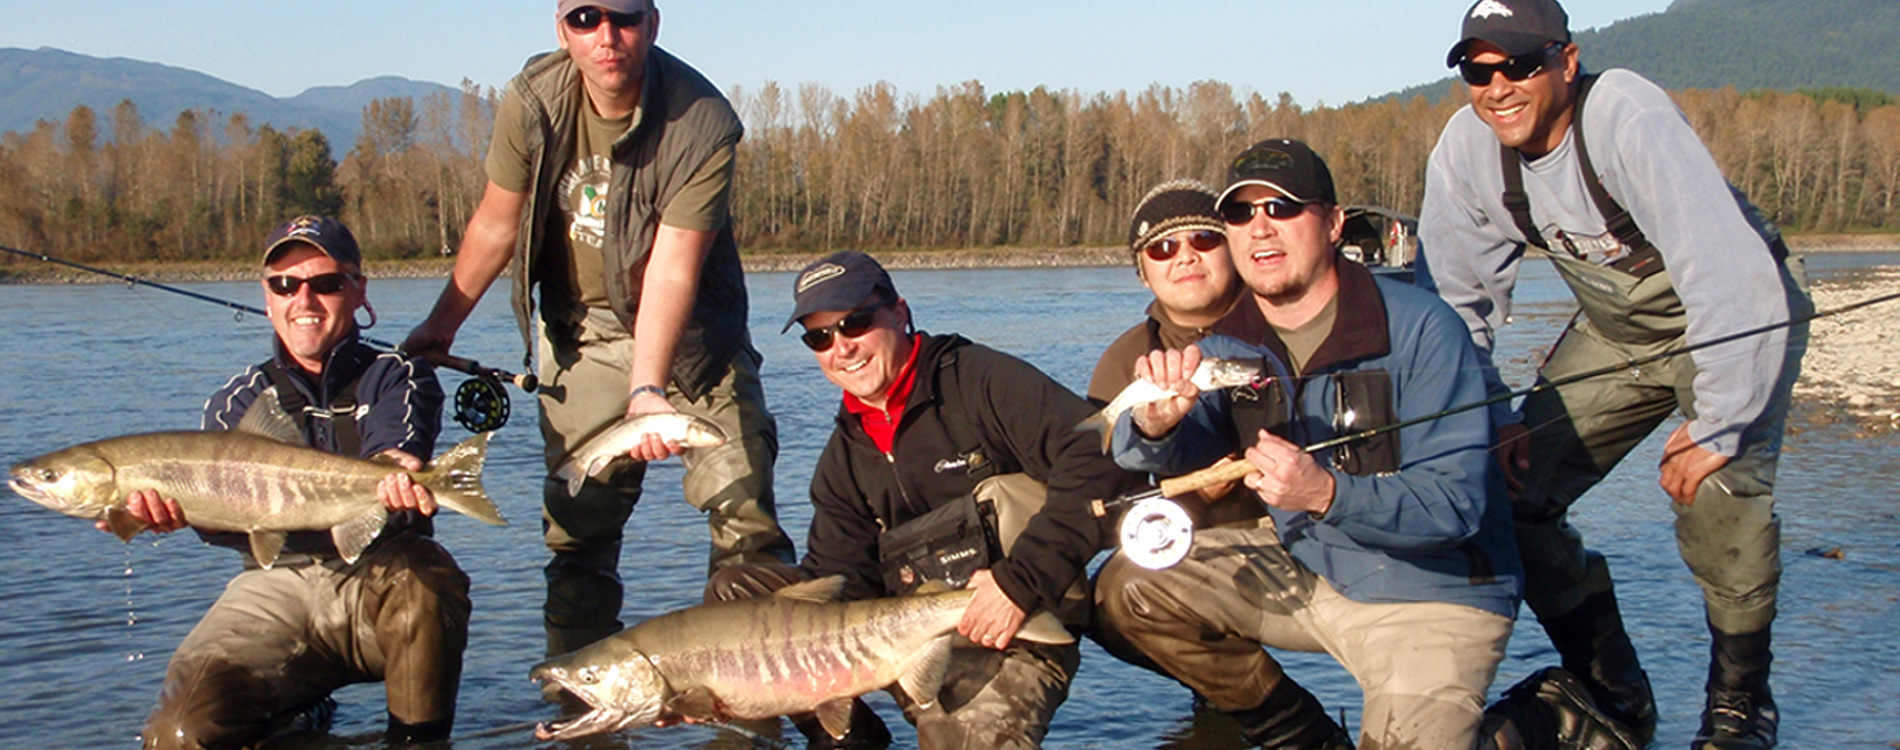 SALMON FISHING ON THE FRASER RIVER IN SUPERNATURAL BC